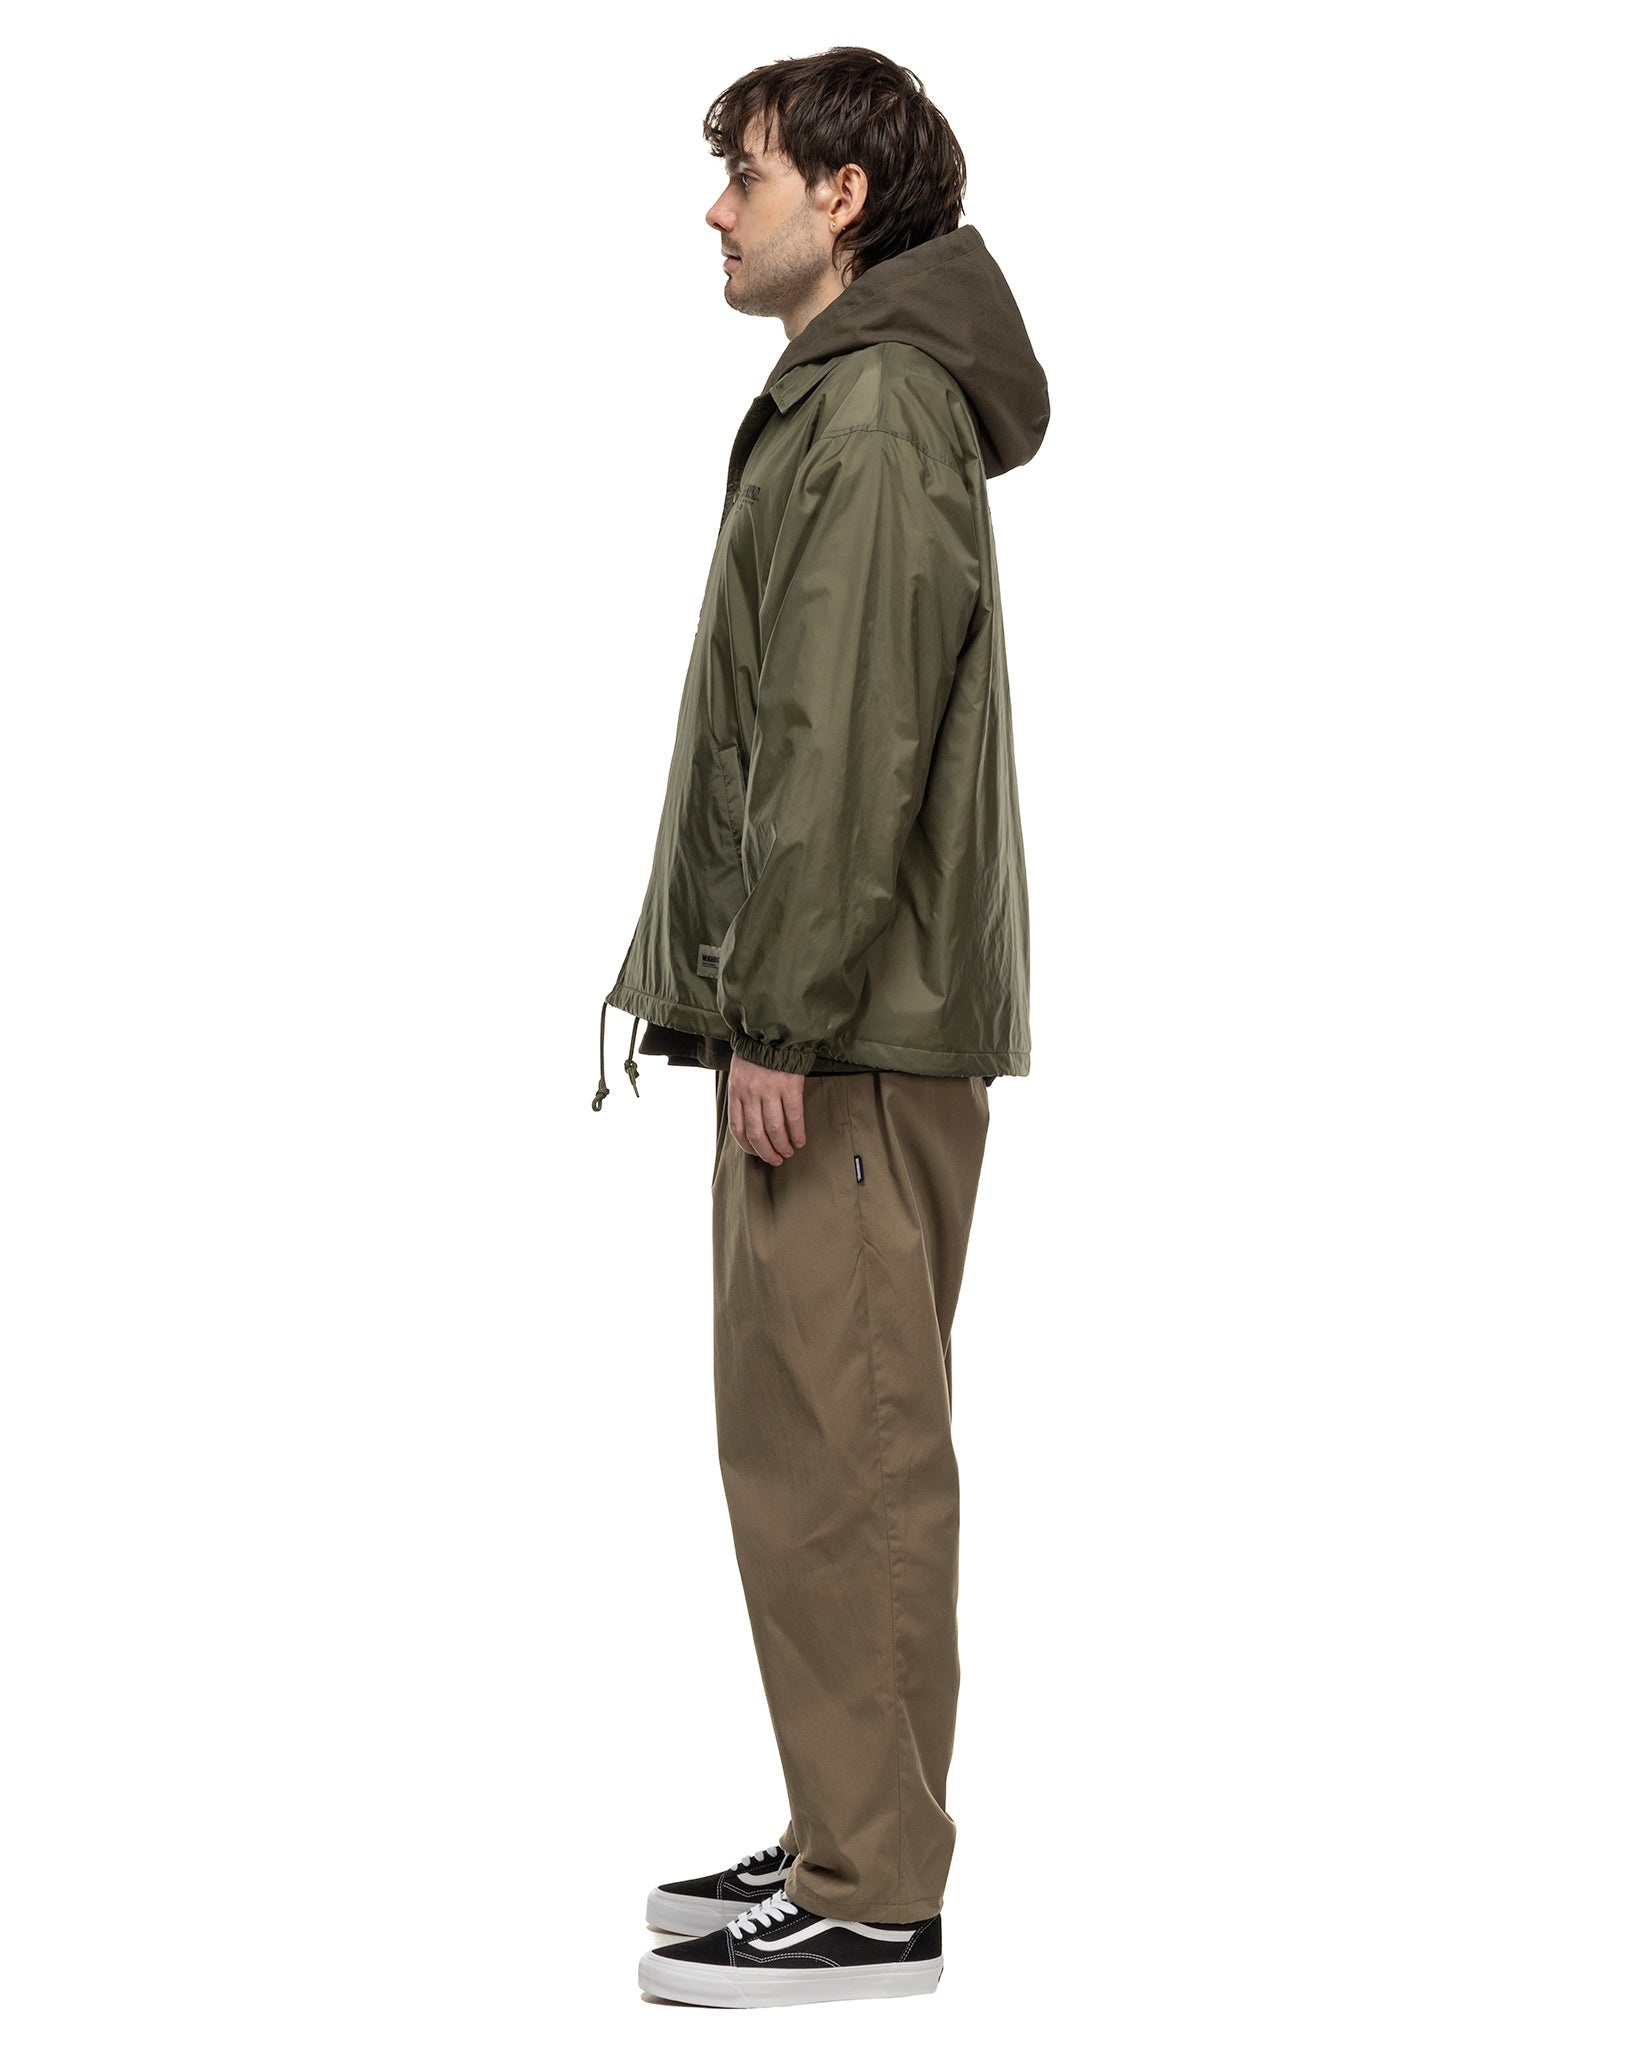 Baggysilhouette Easy Pants Olive Drab - 3